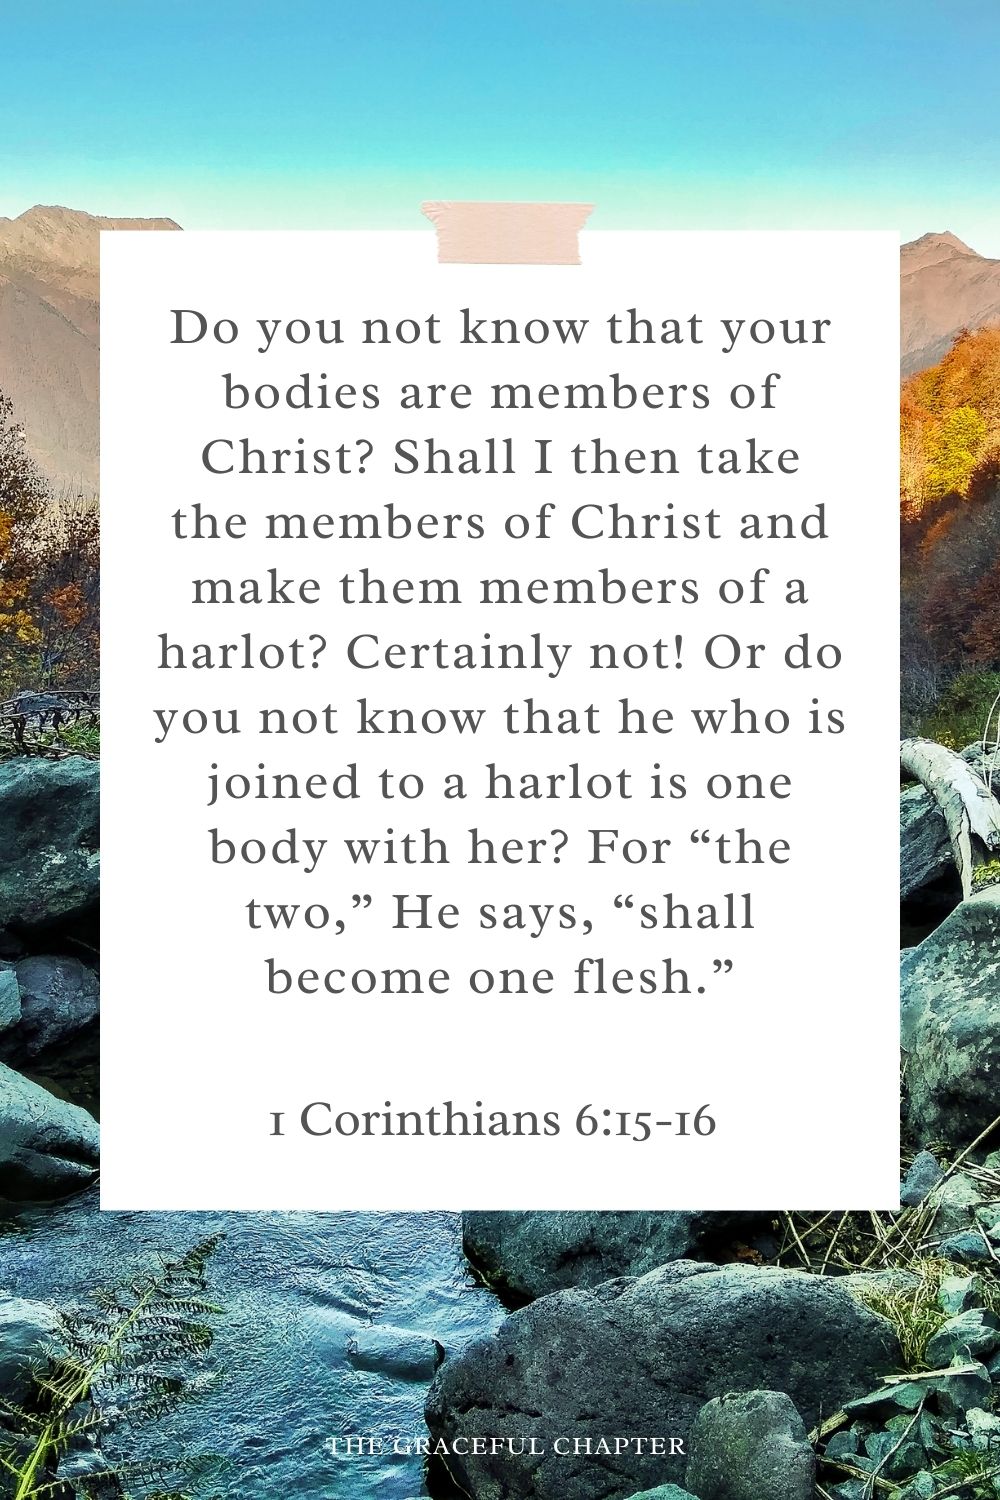 Do you not know that your bodies are members of Christ? Shall I then take the members of Christ and make them members of a harlot? Certainly not! Or do you not know that he who is joined to a harlot is one body with her? For “the two,” He says, “shall become one flesh.” 1 Corinthians 6:15-16